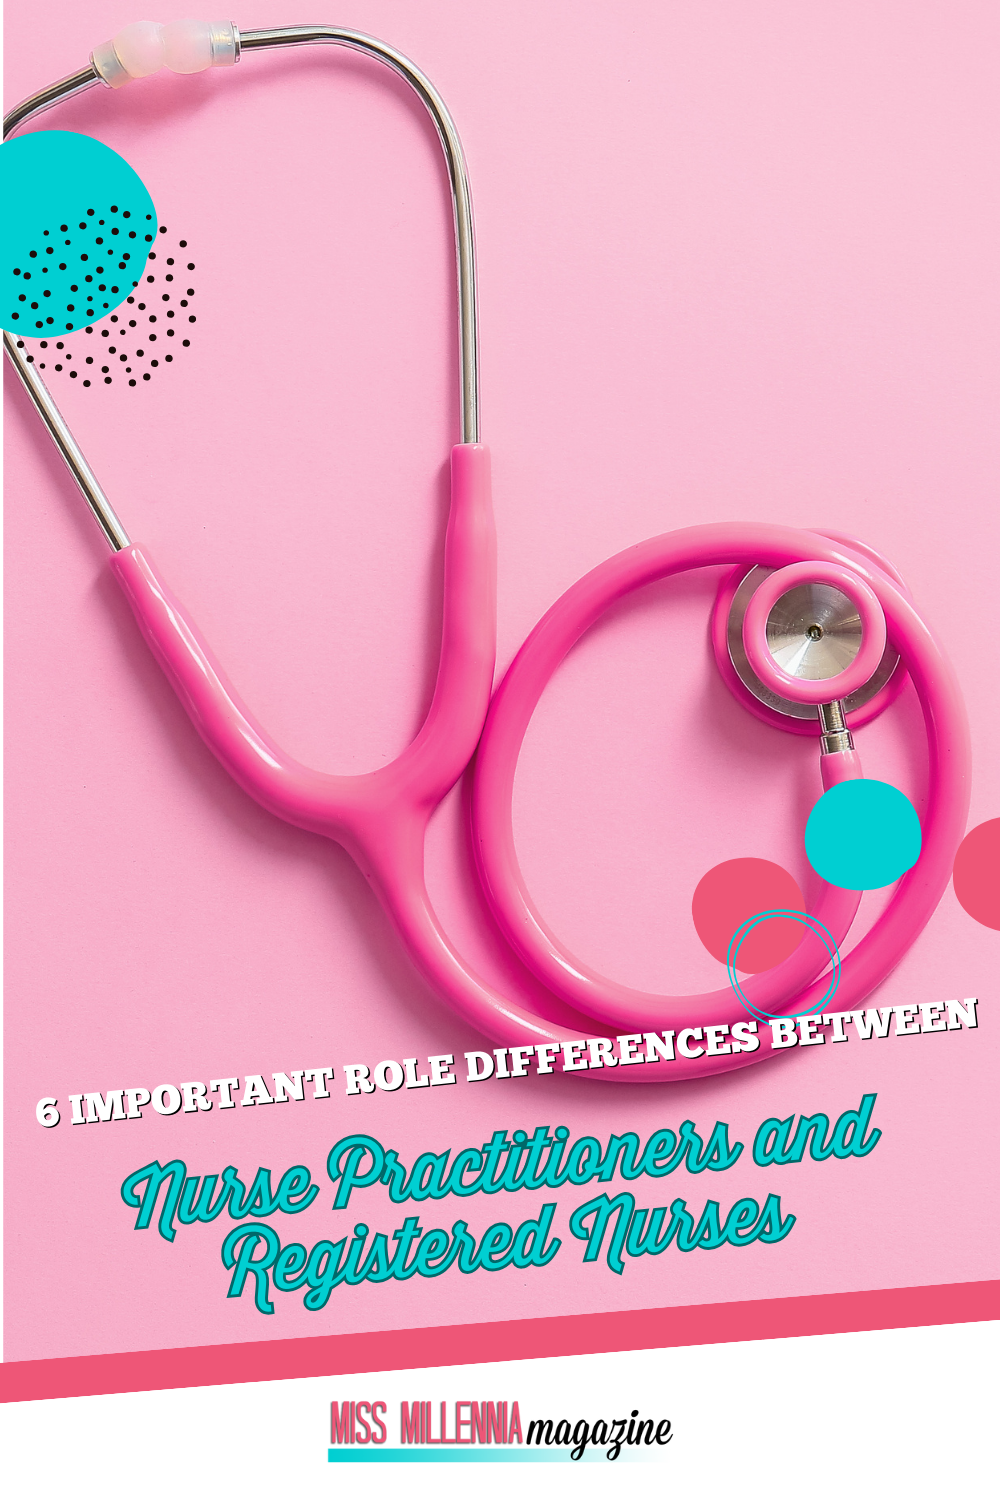 6 Important Role Differences Between Nurse Practitioners and Registered Nurses